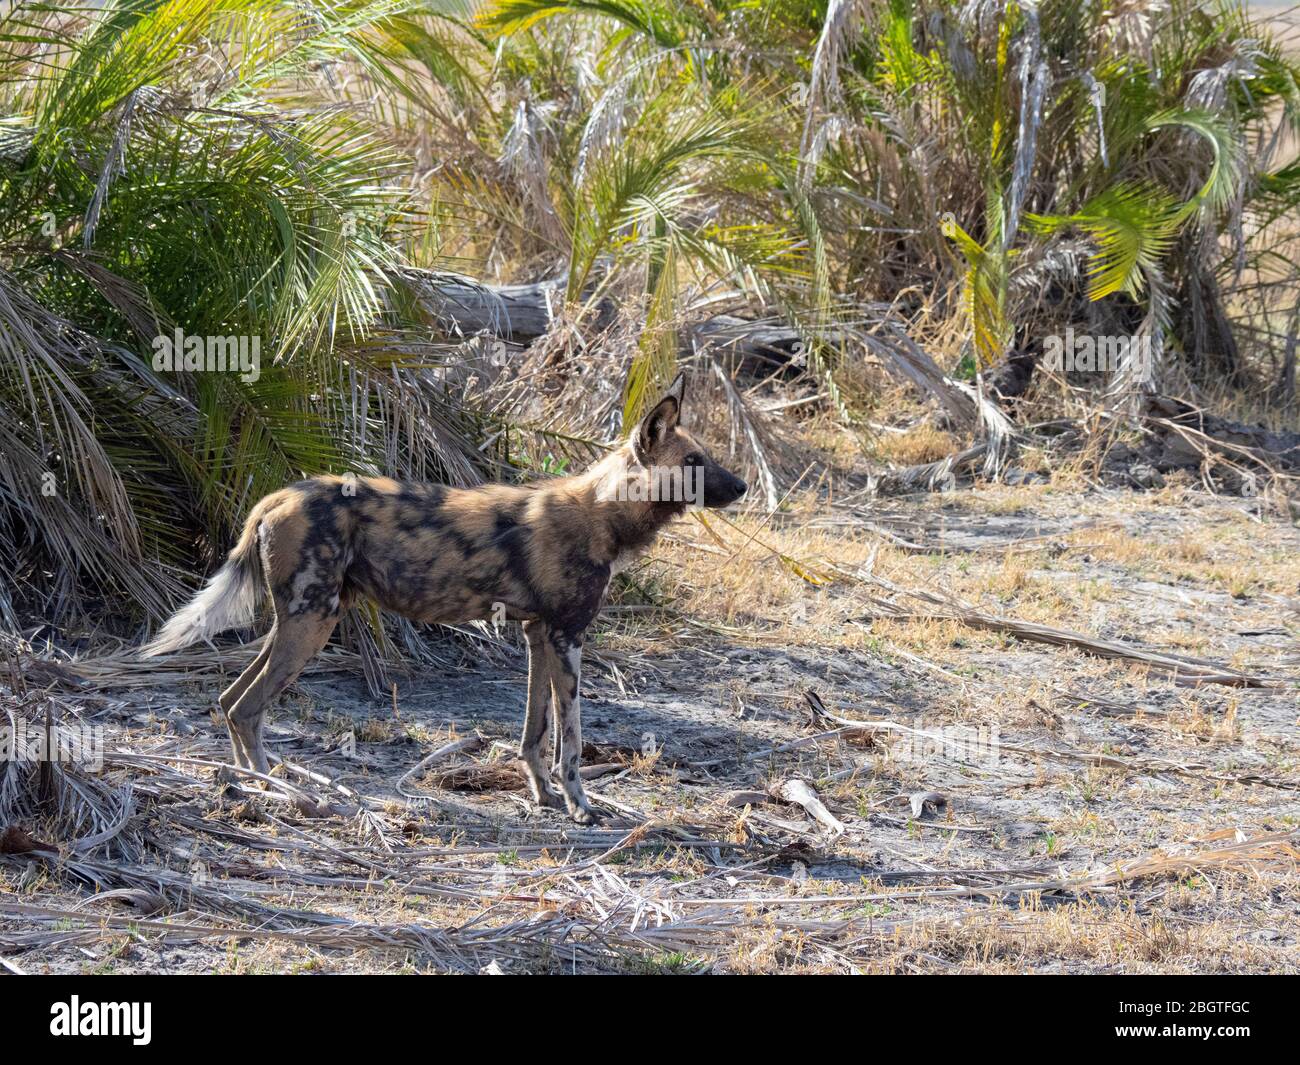 Adult wild dog, Lycaon pictus, resting after a hunt in the Okavango Delta, Botswana, South Africa. Stock Photo